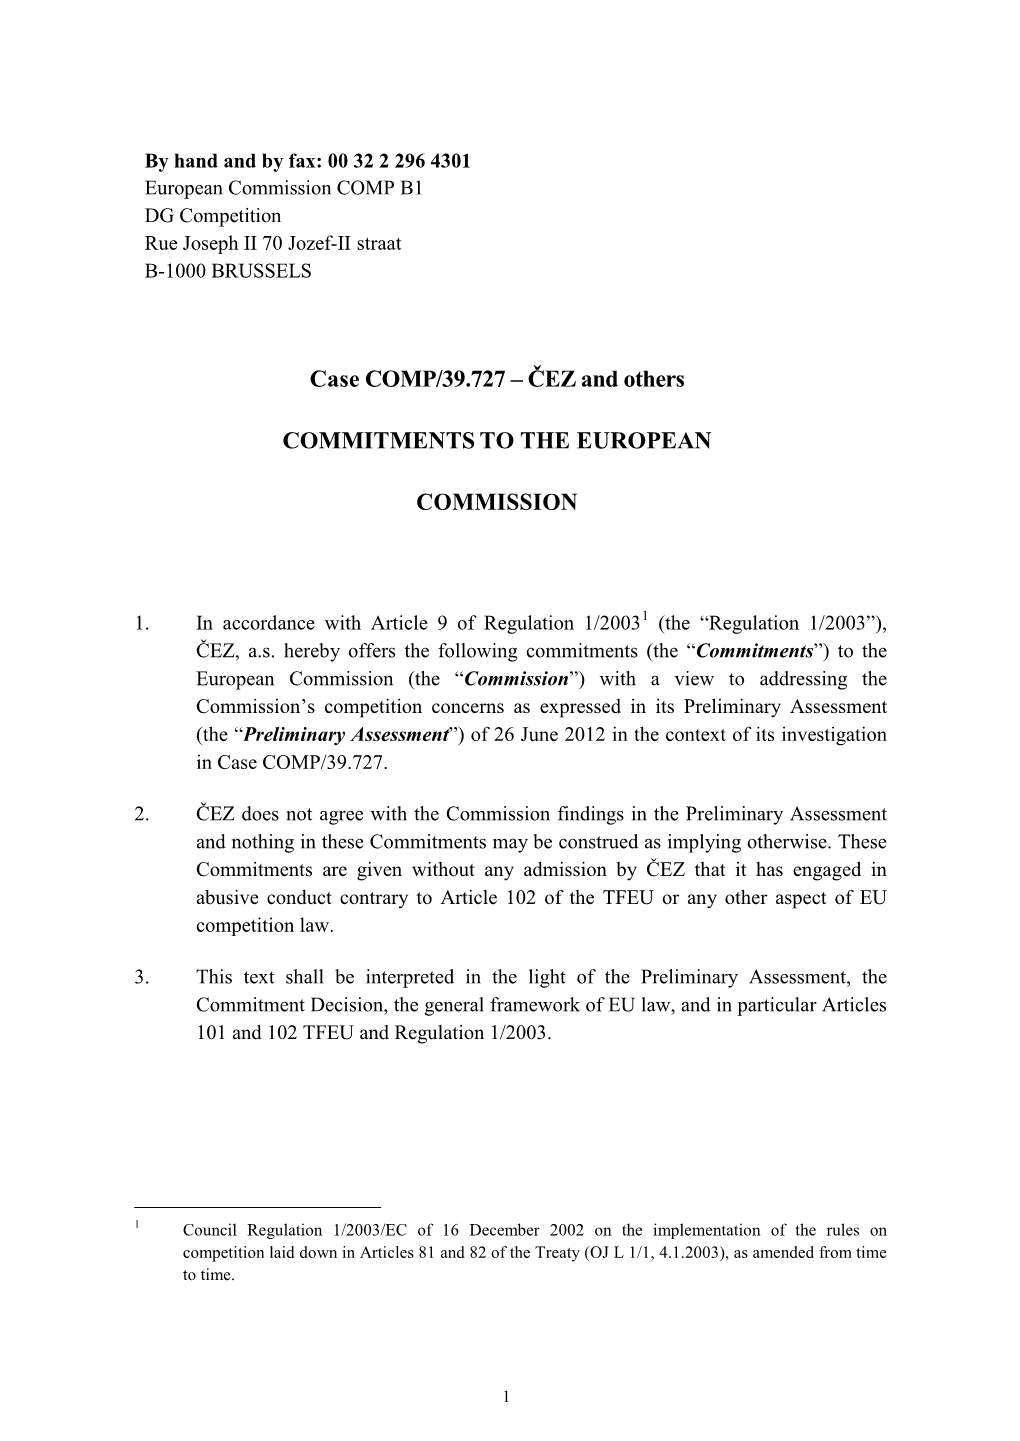 Case COMP/39.727 – ČEZ and Others COMMITMENTS to THE